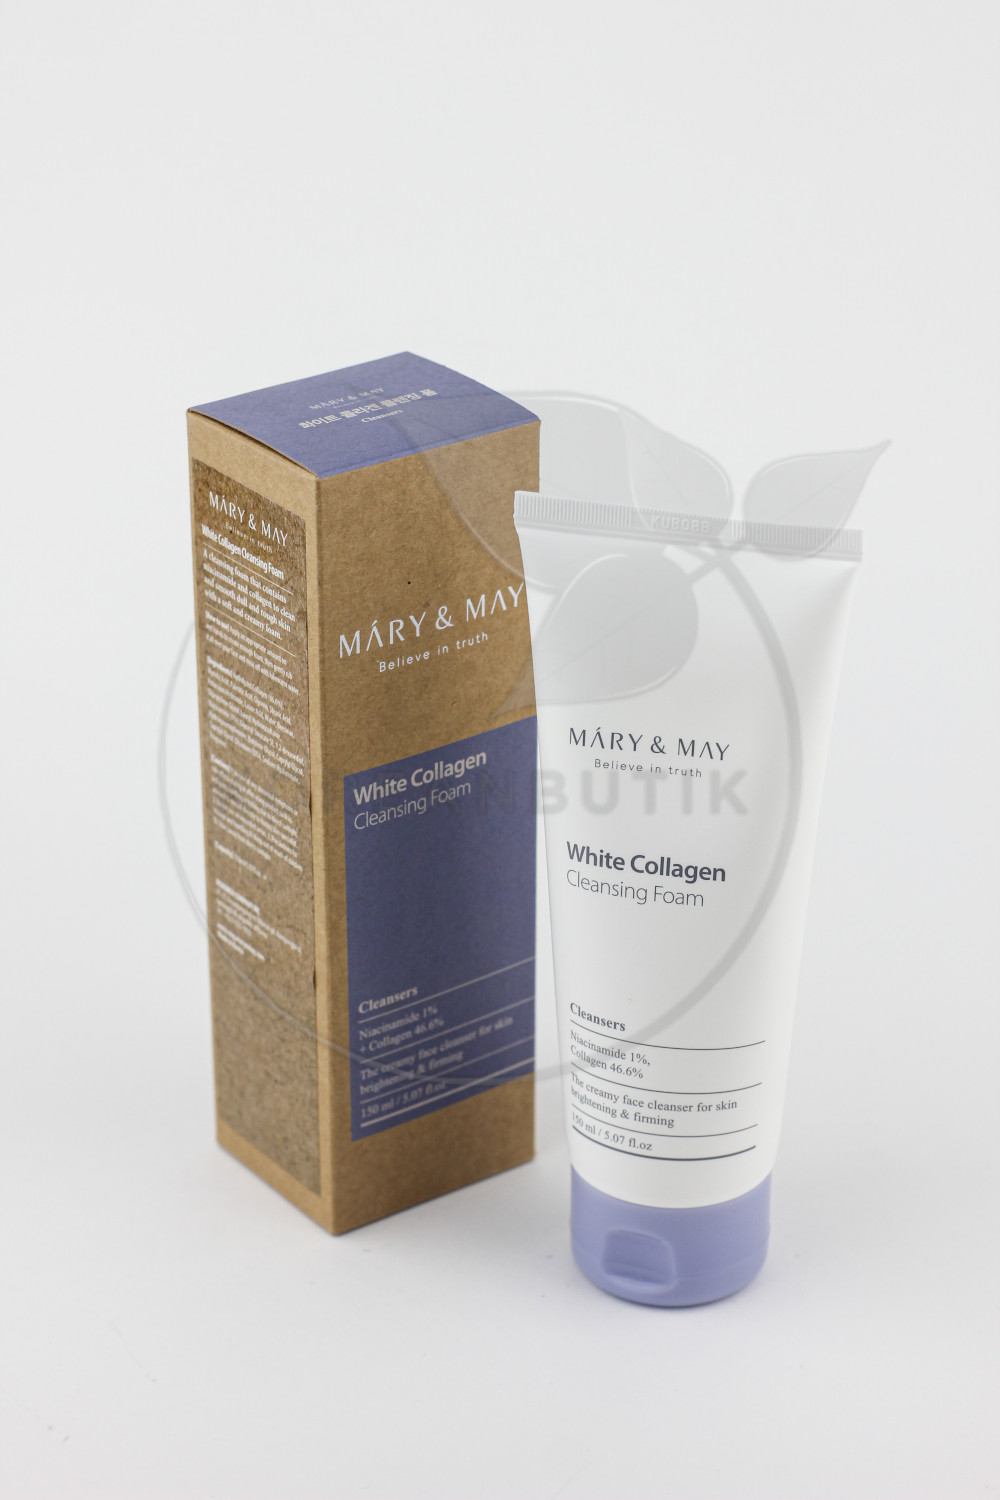  Mary&May White Collagen Cleansing Foam 150ml 